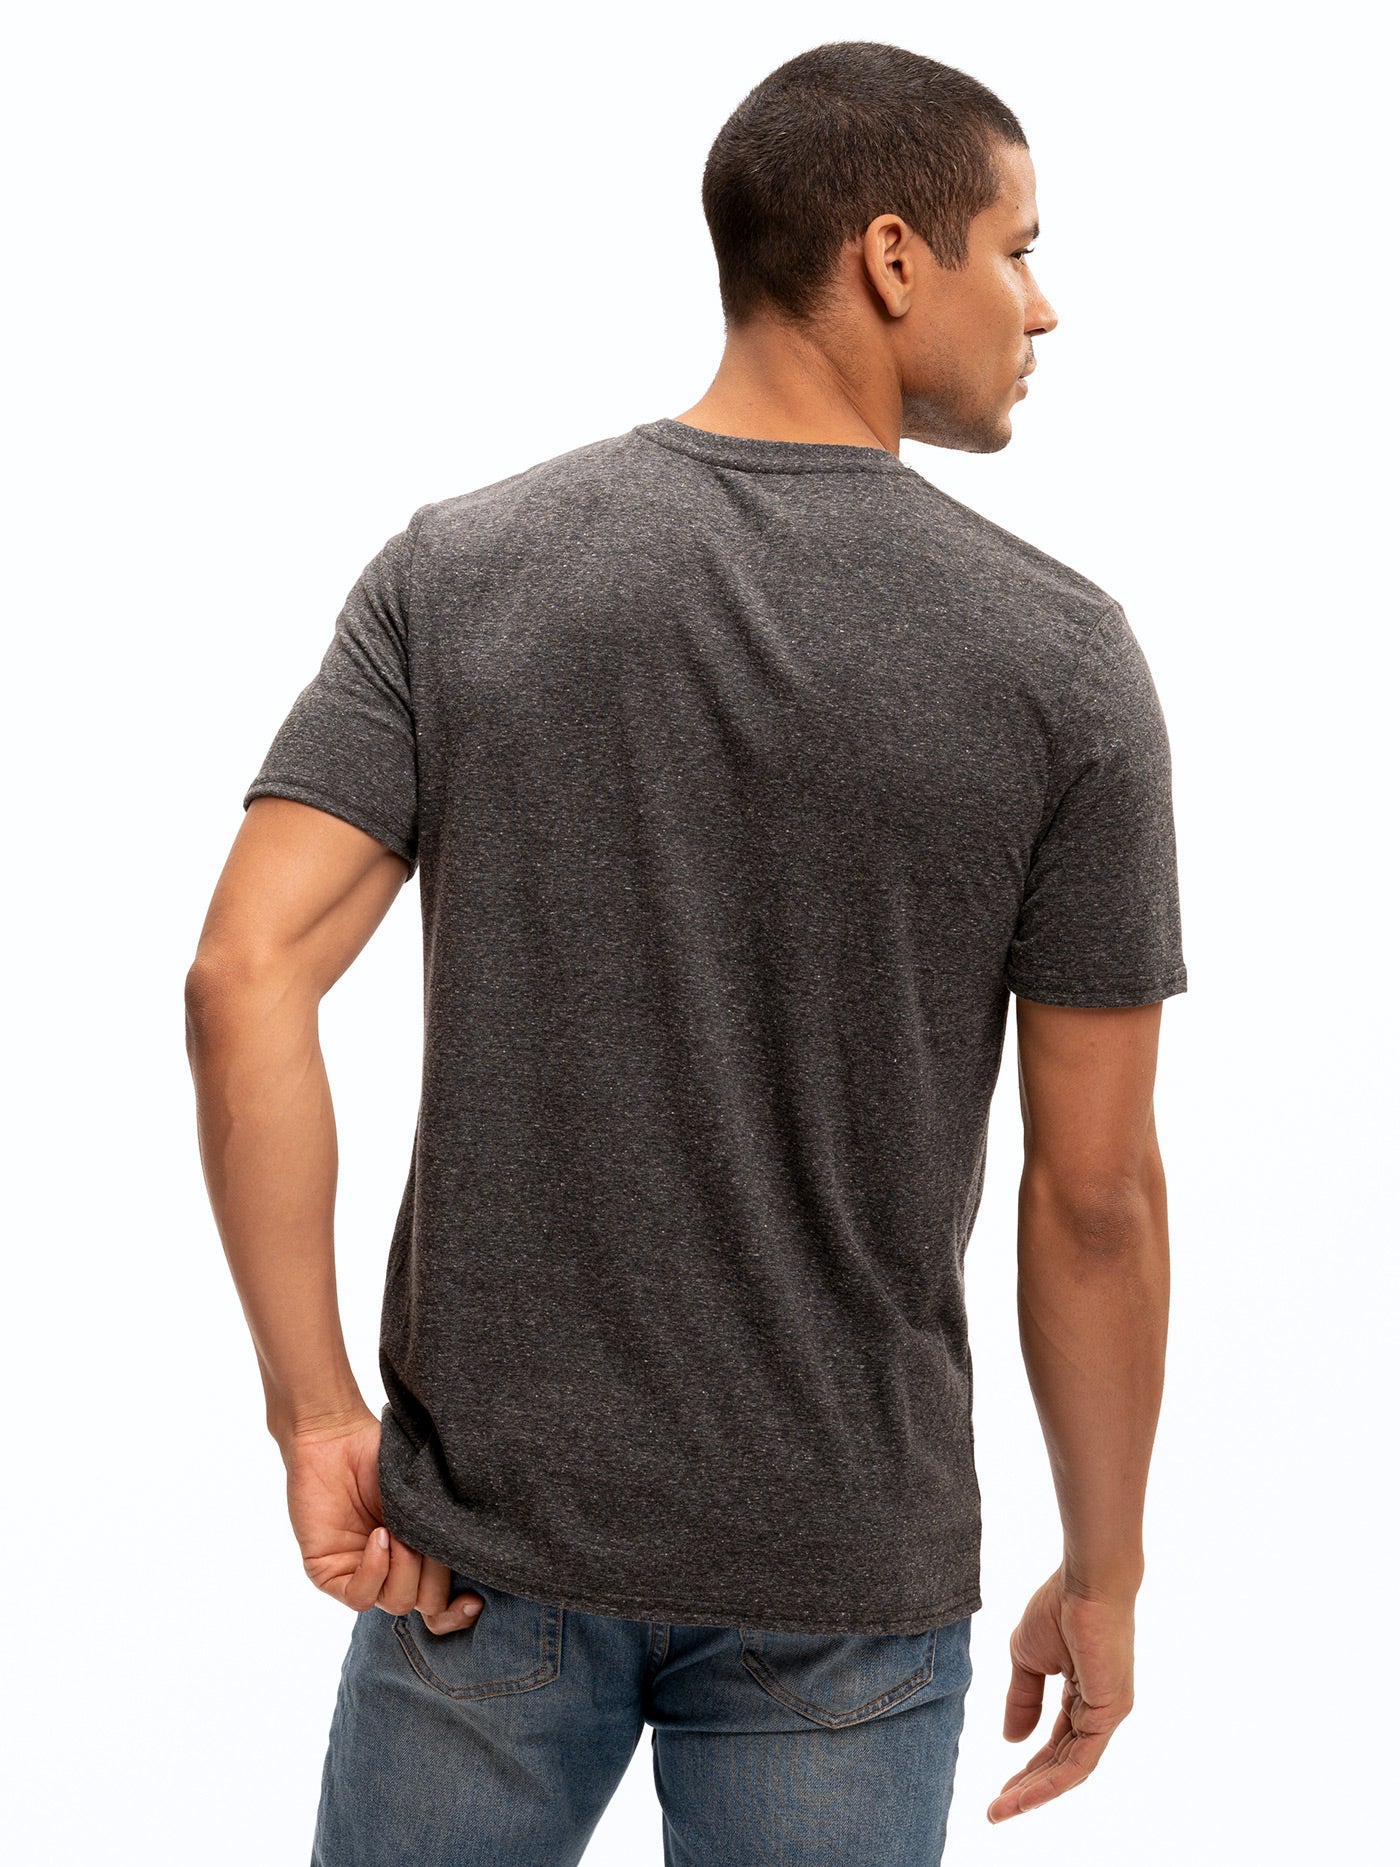 Men's Clothing – Threads 4 Thought